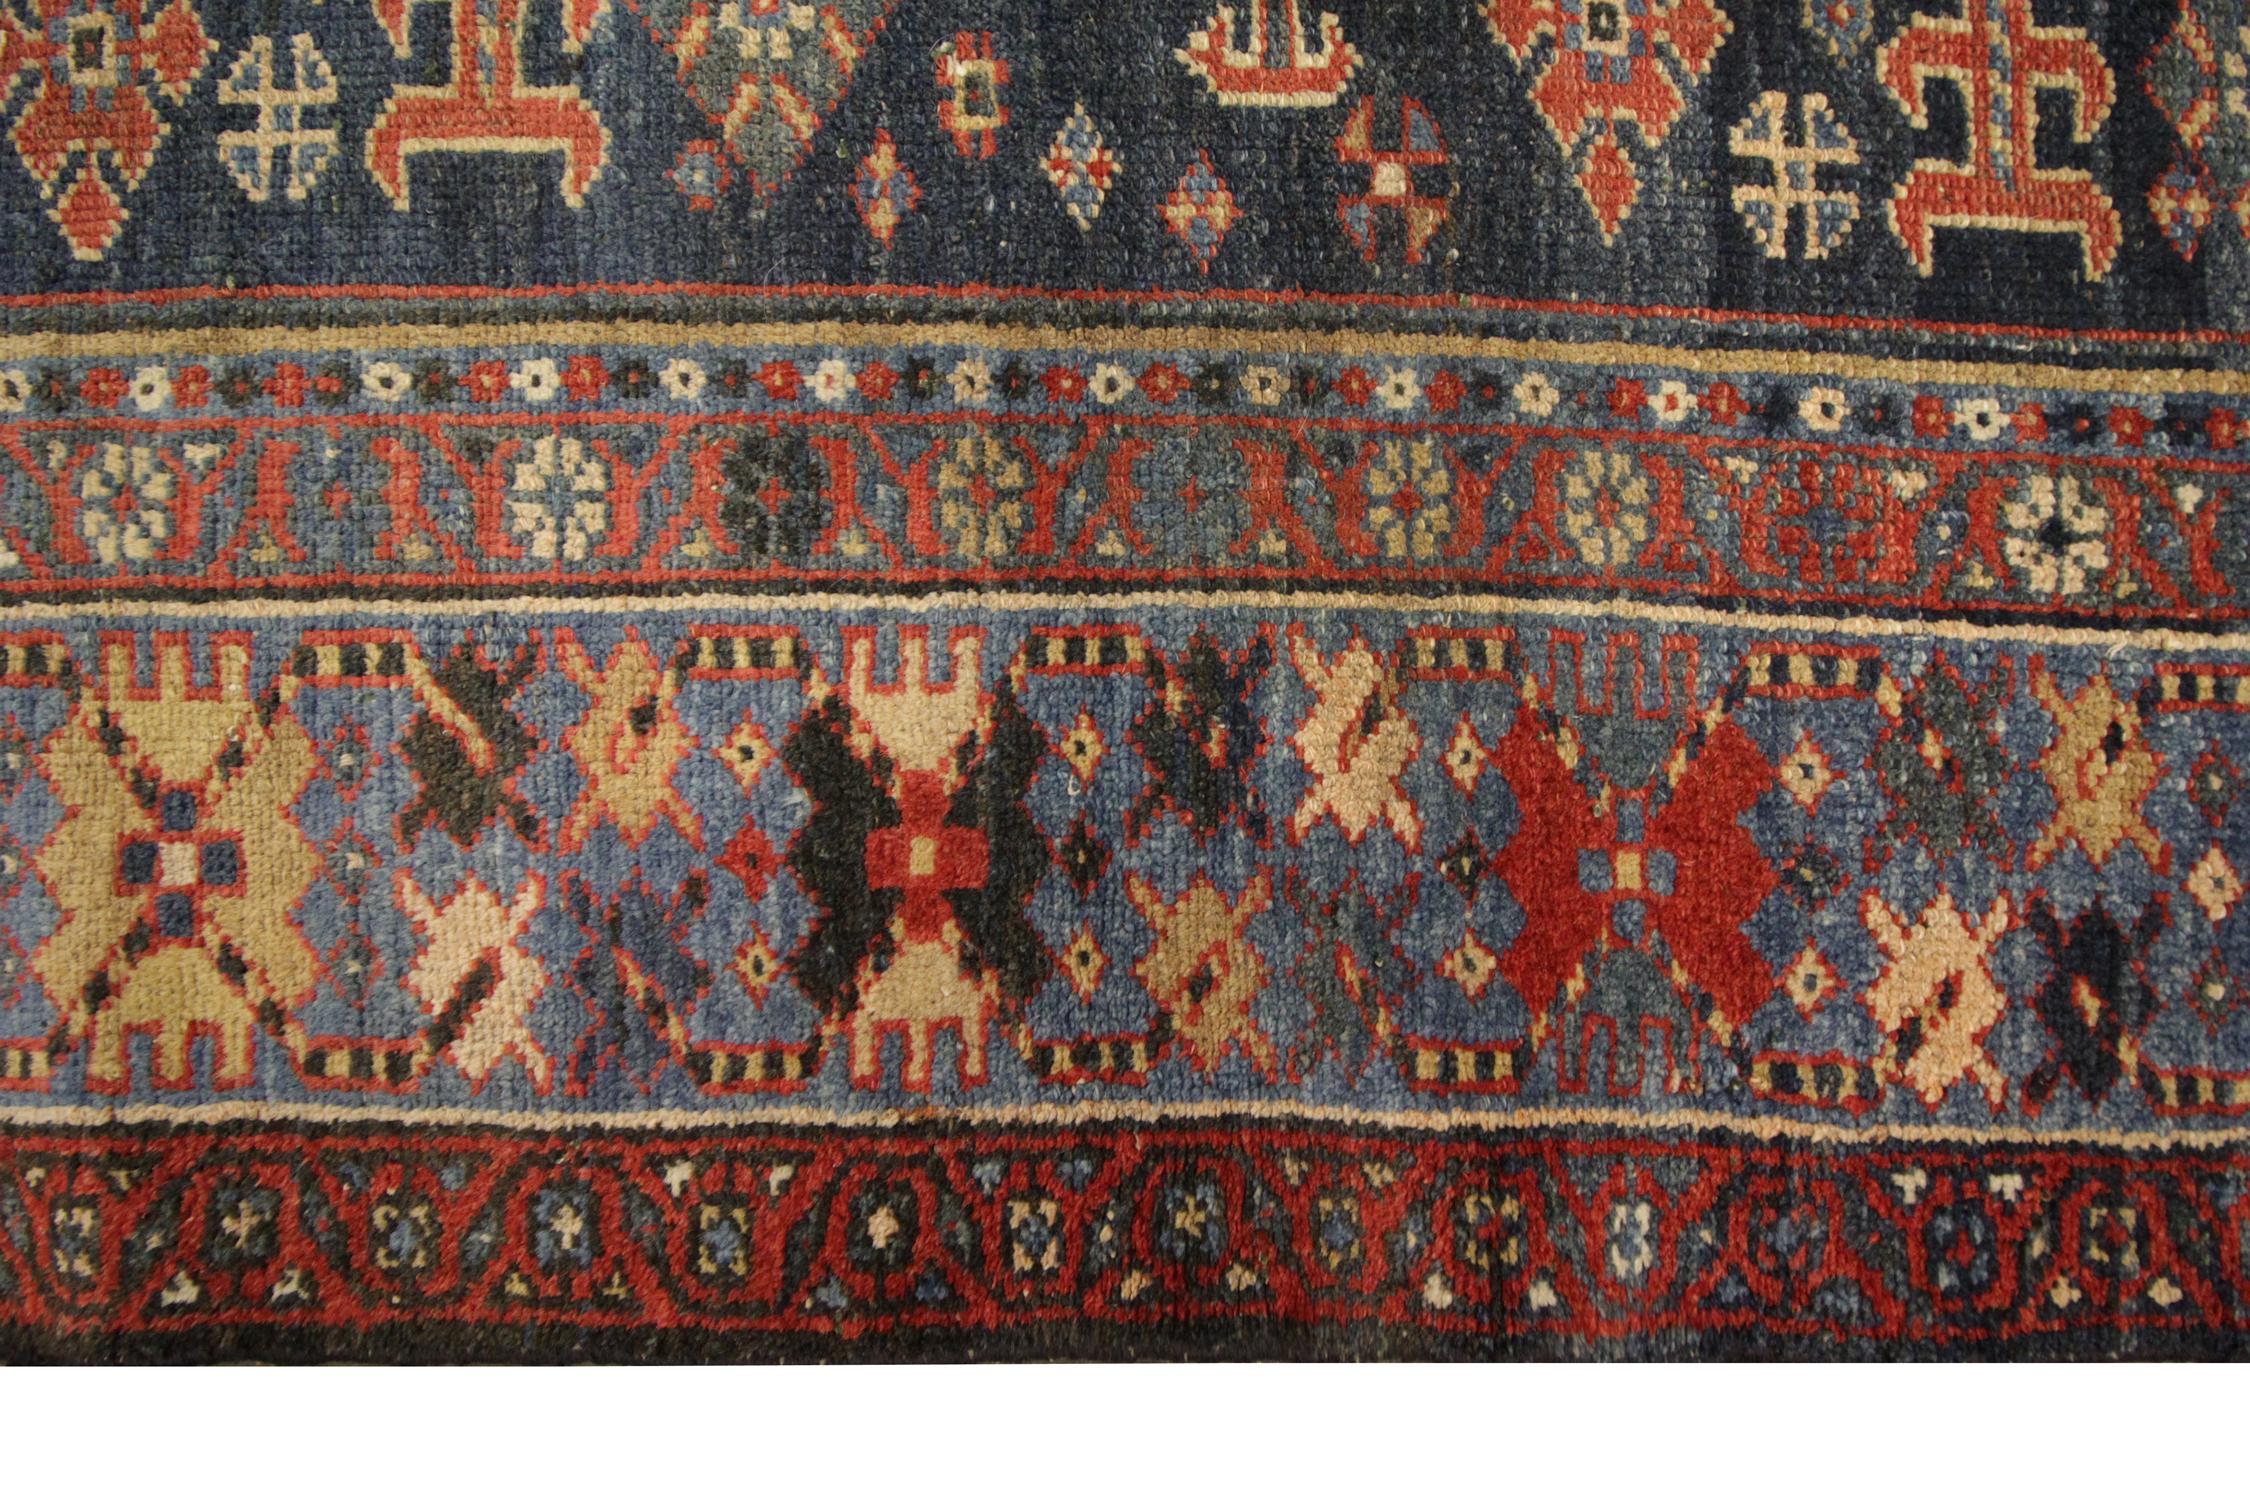 High-Quality Antique Caucasian Living Room Rug Multicolored Tribal Carpet Rug In Excellent Condition For Sale In Hampshire, GB